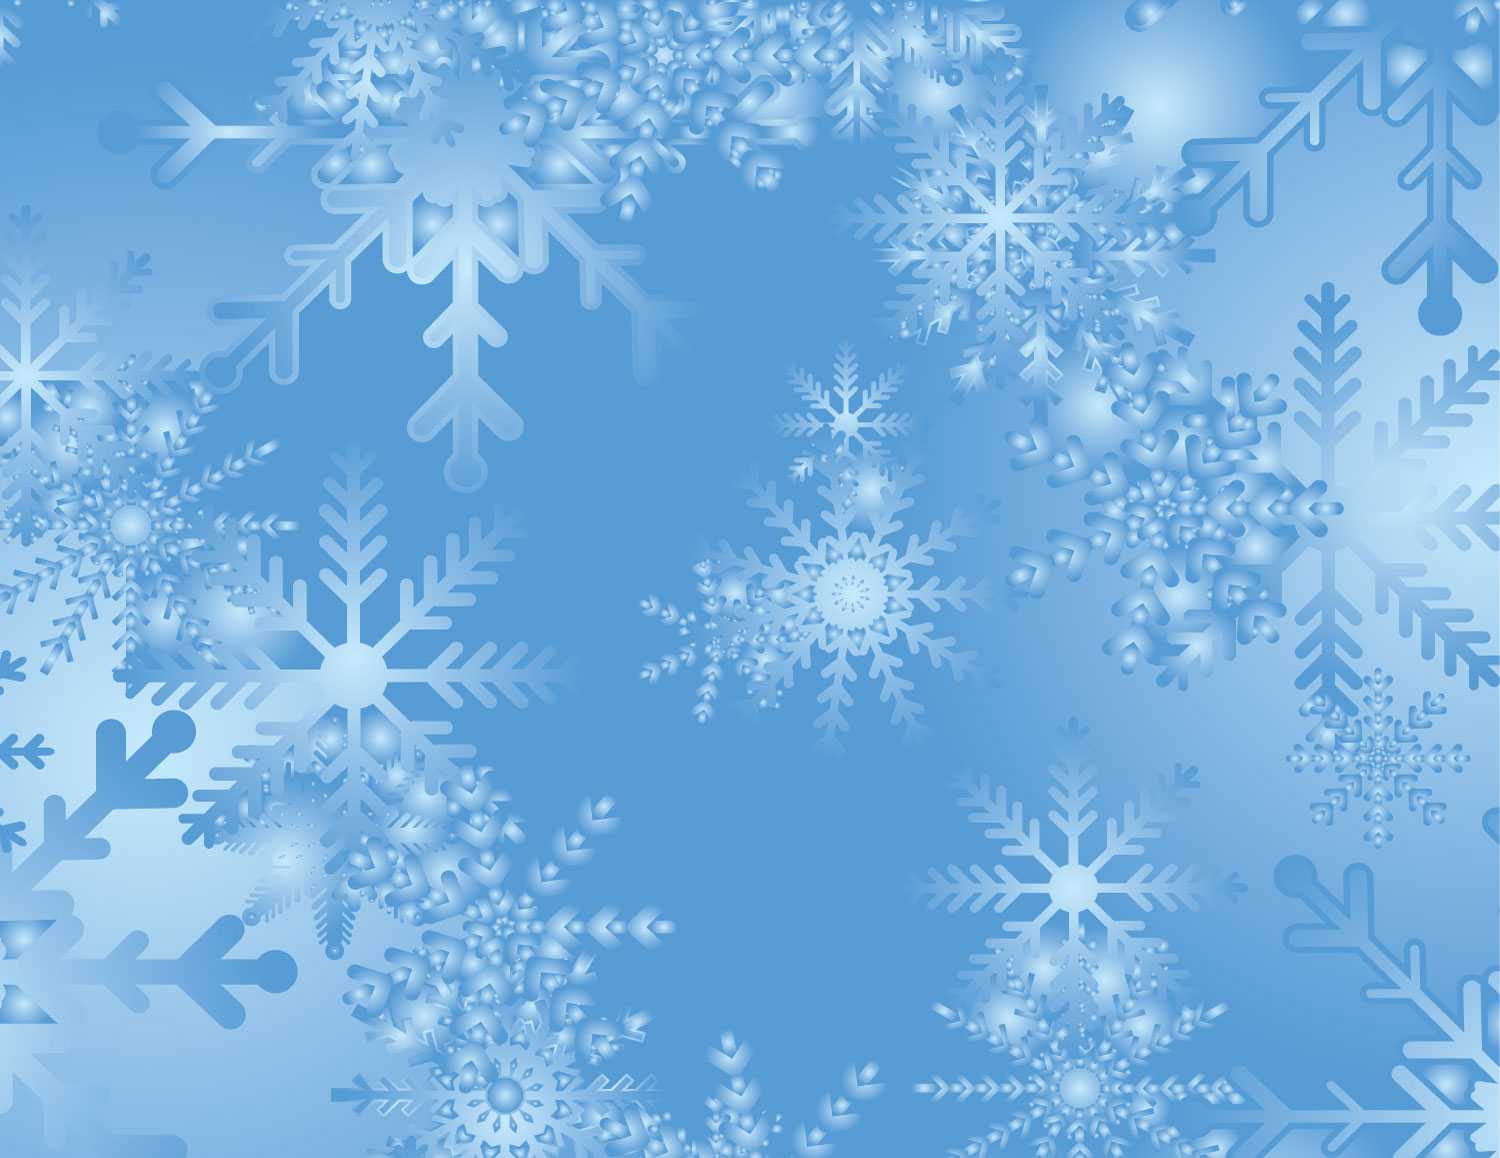 Blue Snowflake Quality Backgrounds For Powerpoint Templates Intended For Snow Powerpoint Template